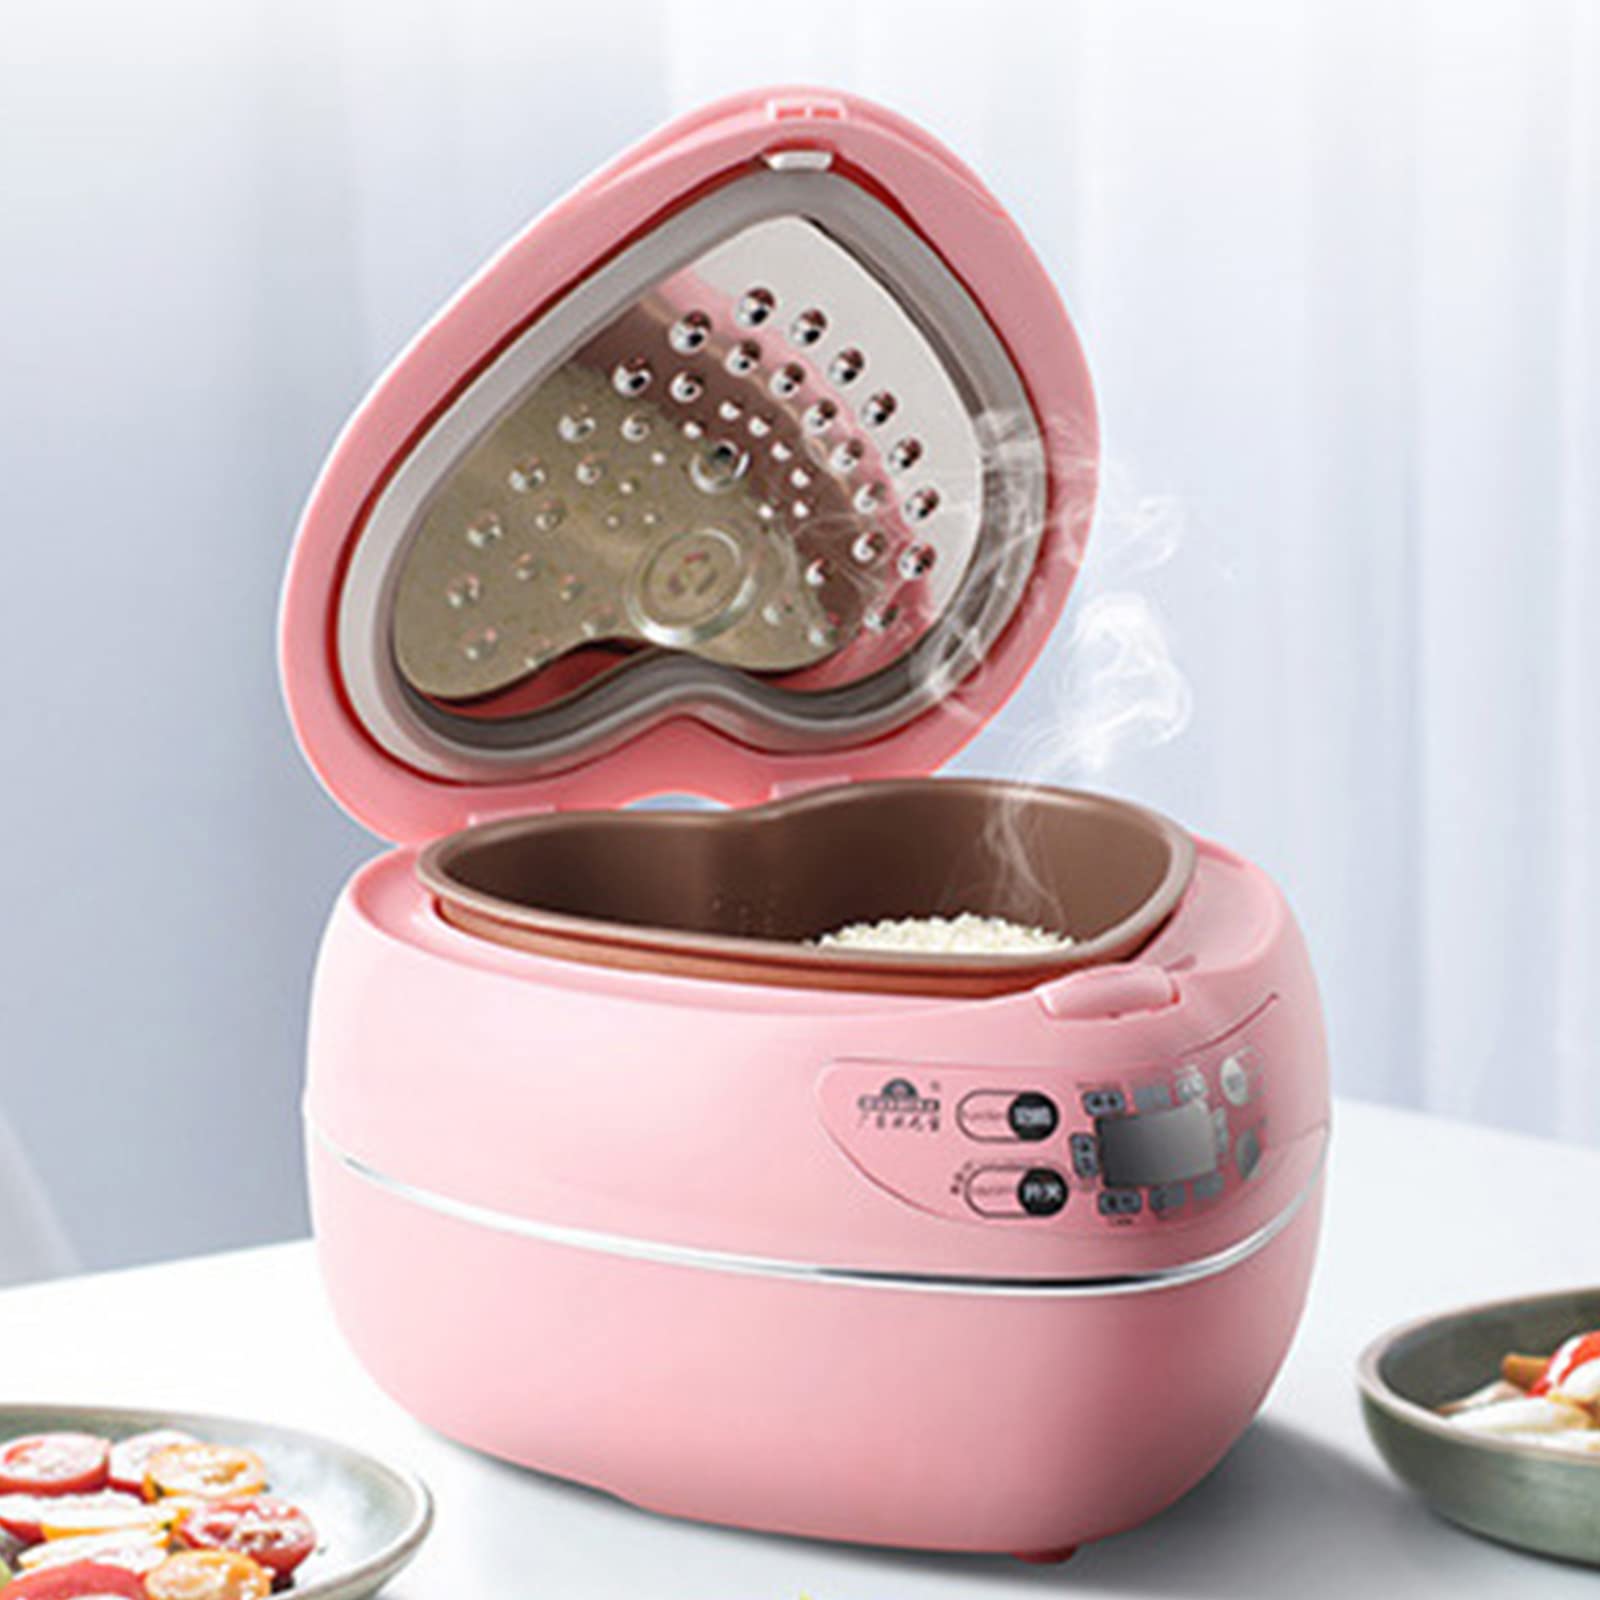 Peach Heart Shape Rice Cooker Smart 300W Rice Cooker 1.8L, Portable 6 in 1 Rice Cooker with Preset Timer and Thermostat,A